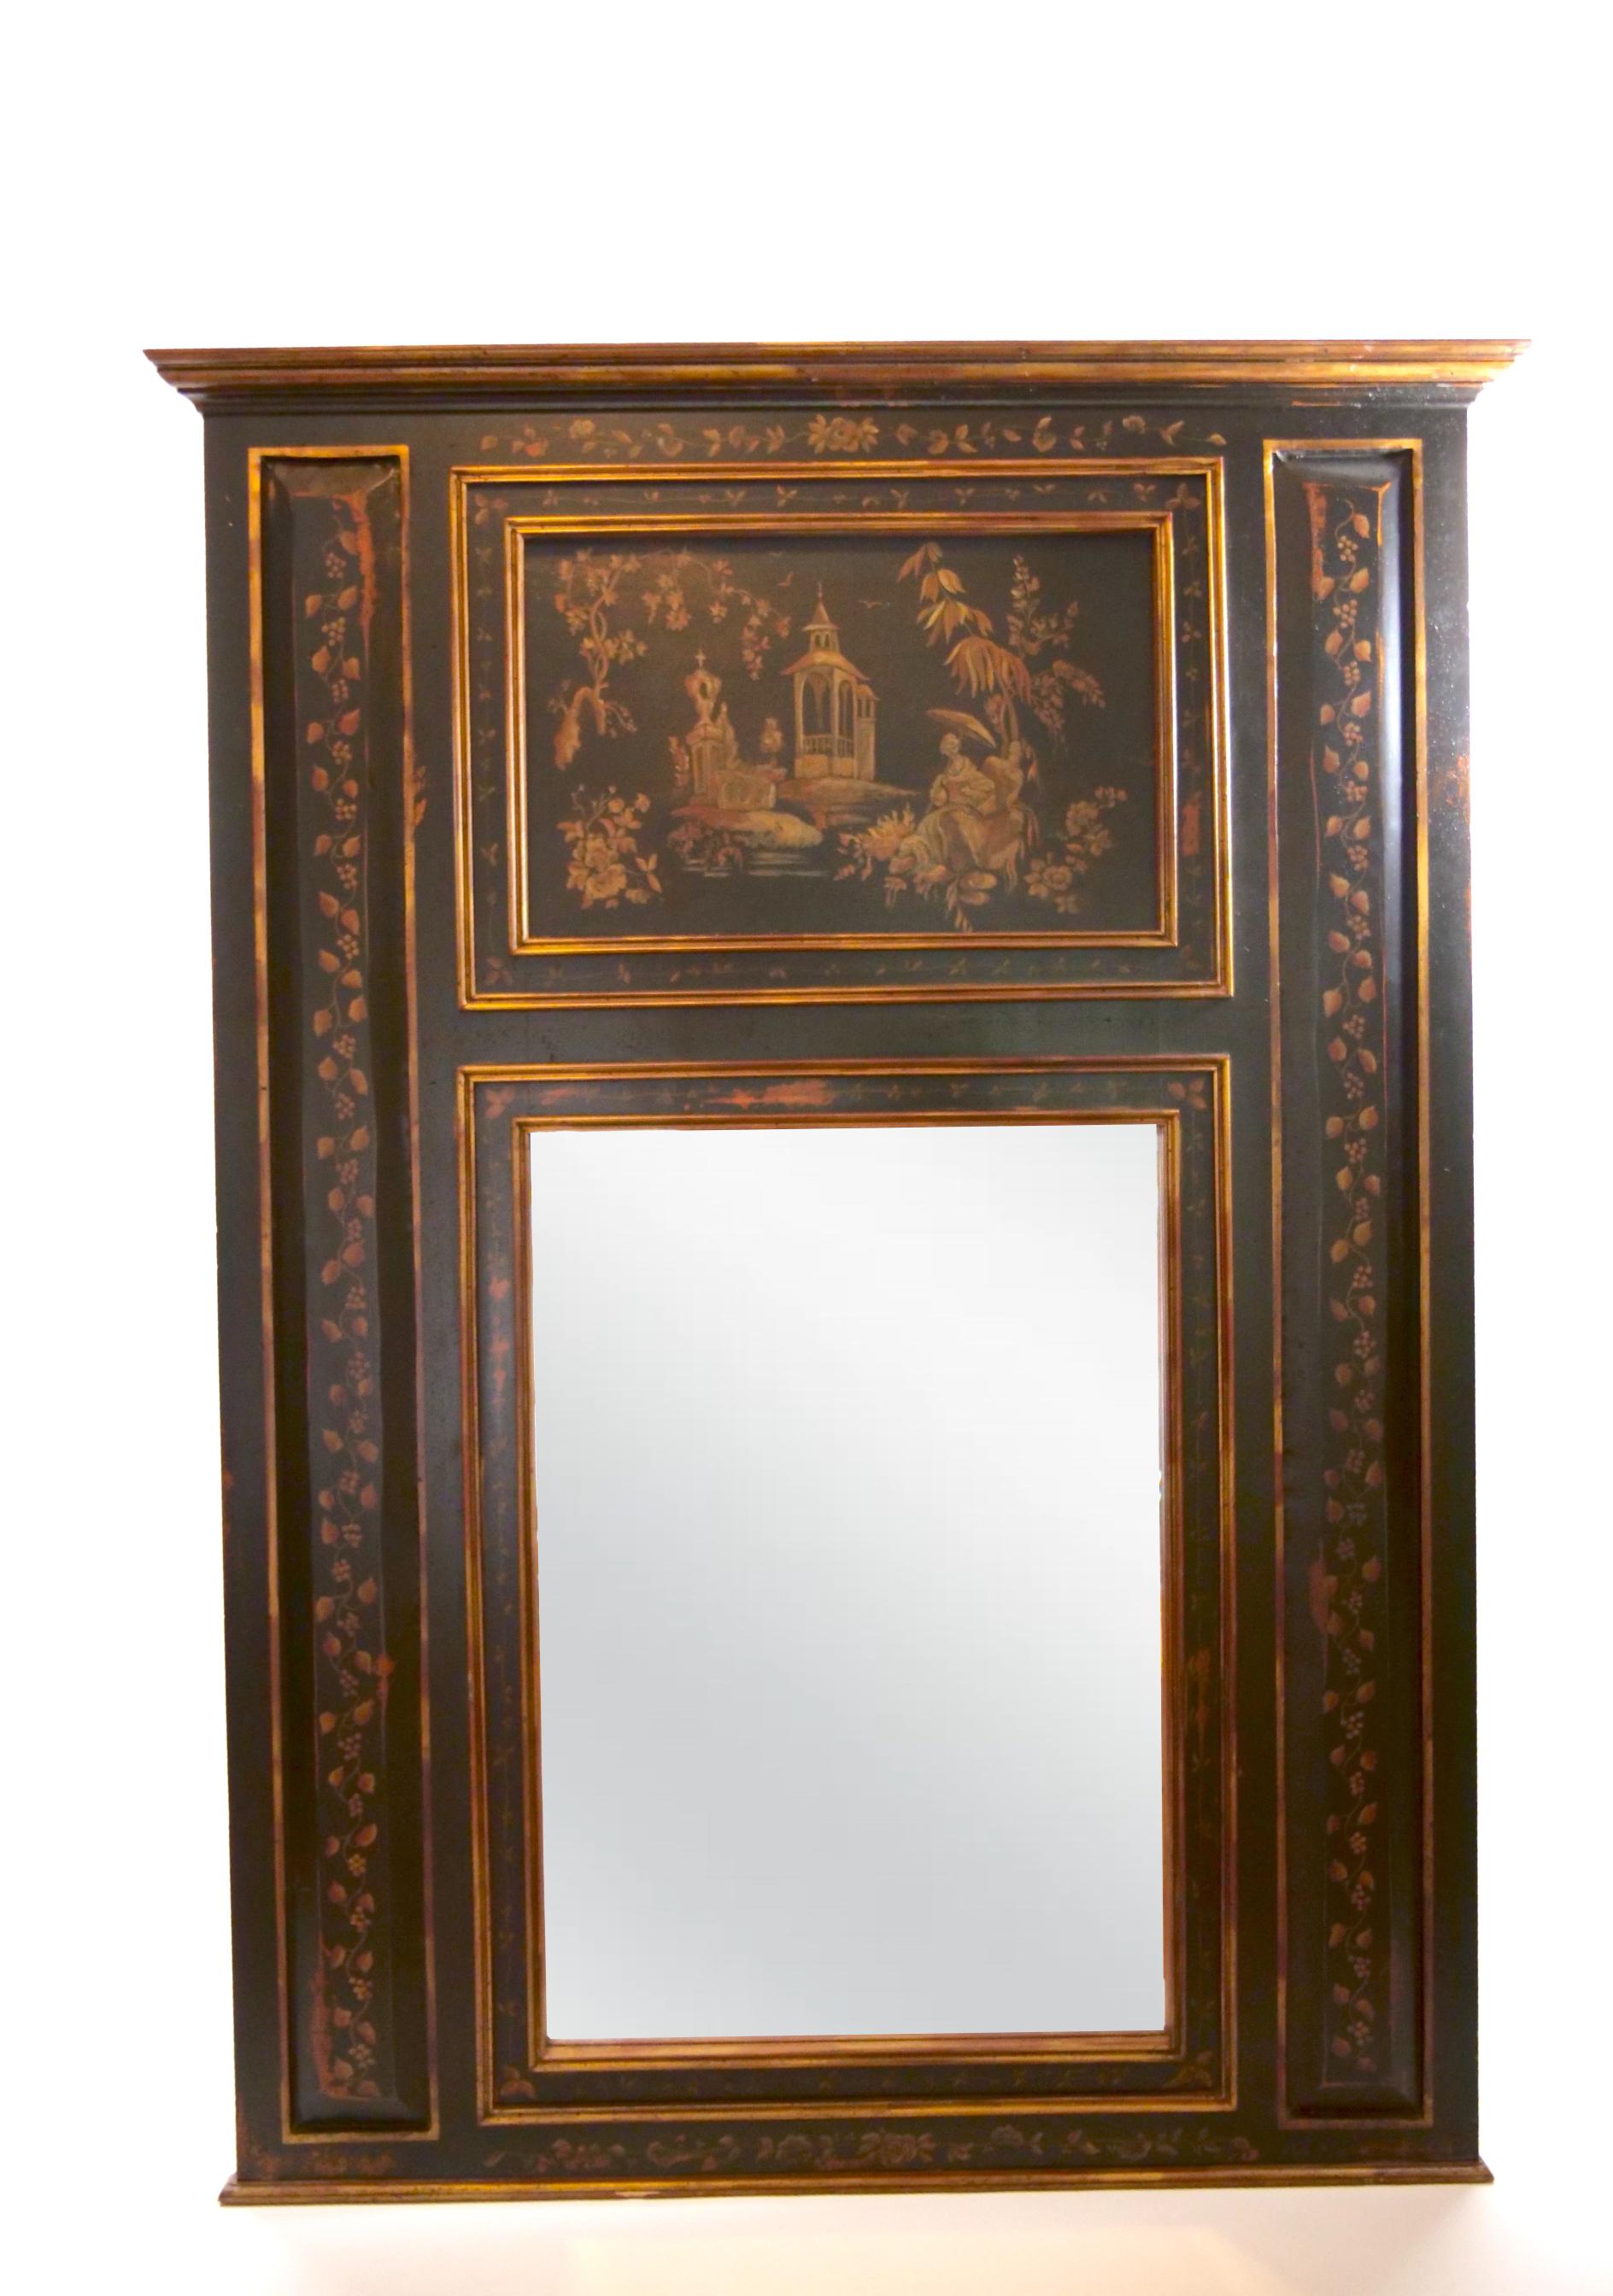 Gold Hand Painted Wood Chinoiserie Panels Trumeau Mirror For Sale